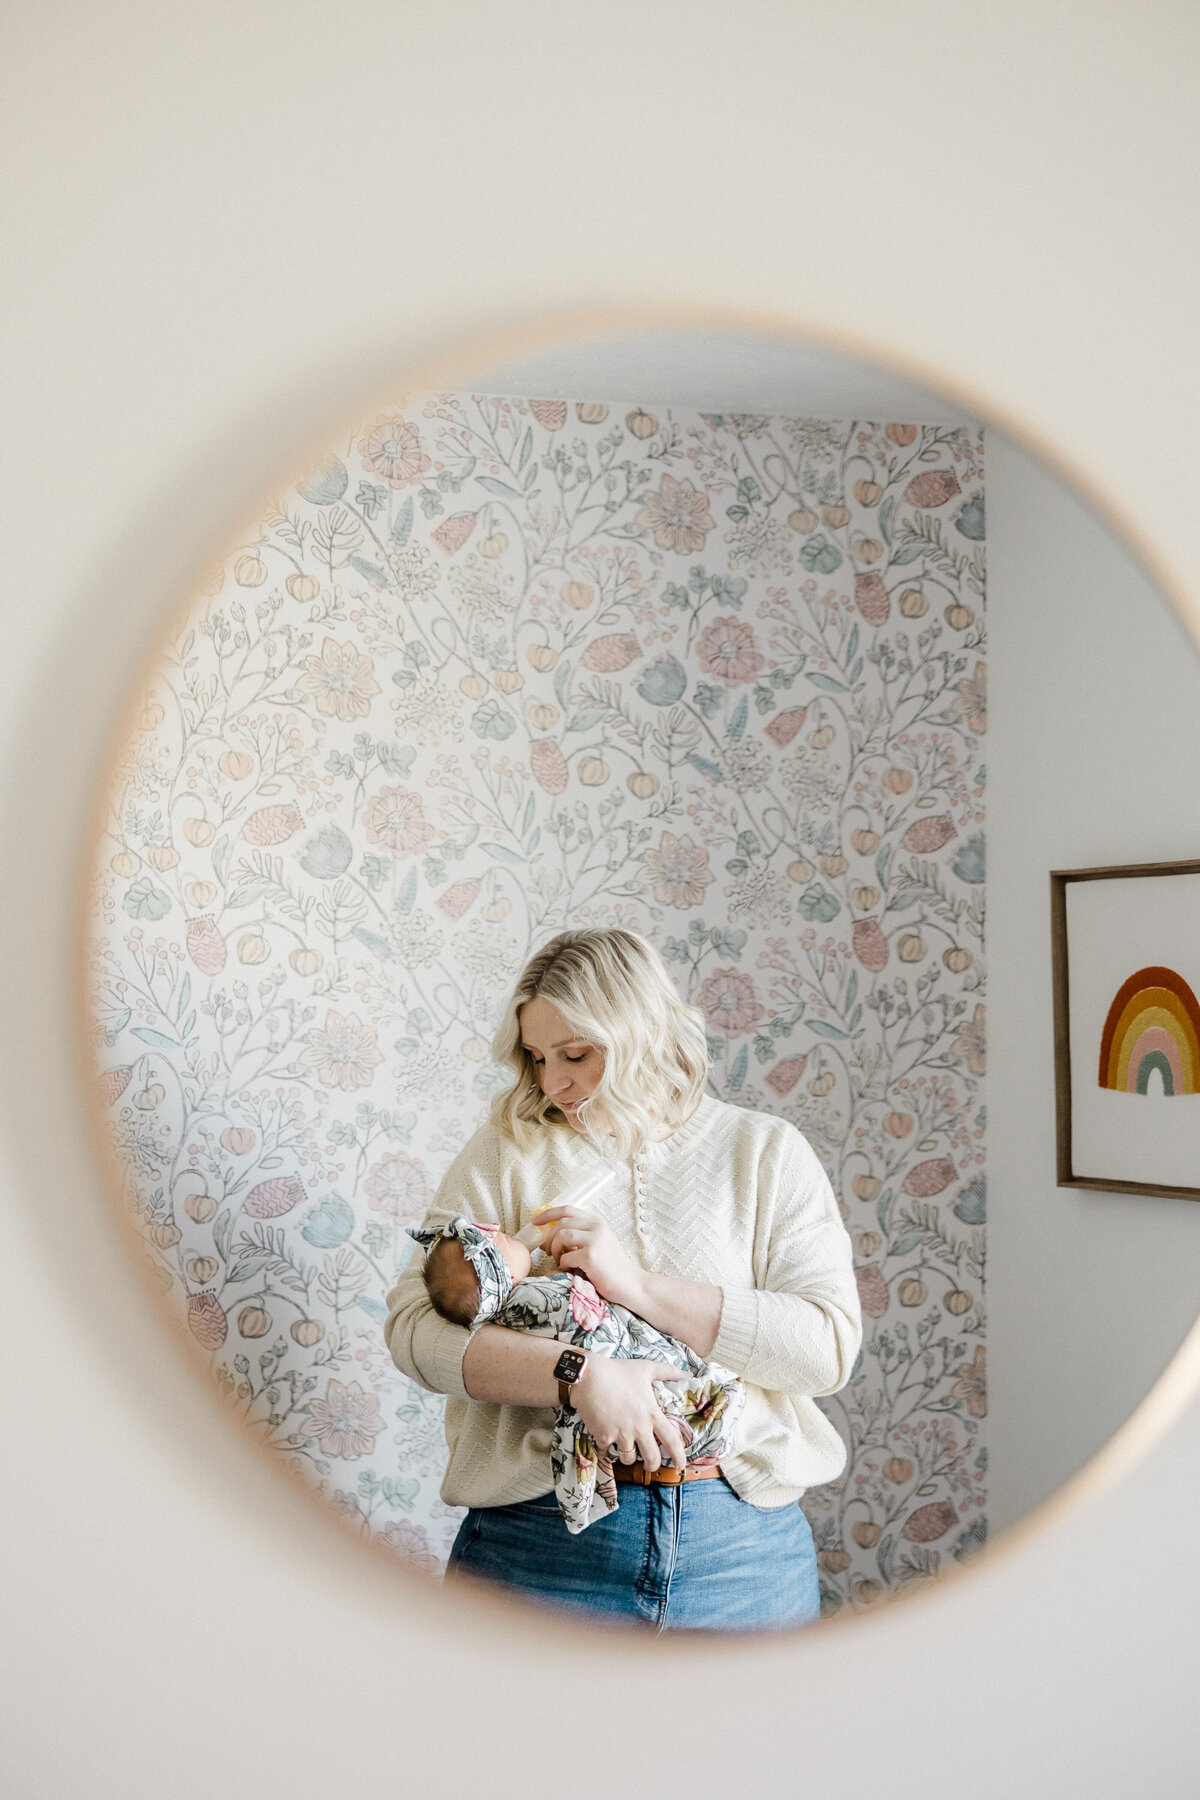 photo of new mom in mirror reflection holding baby girl